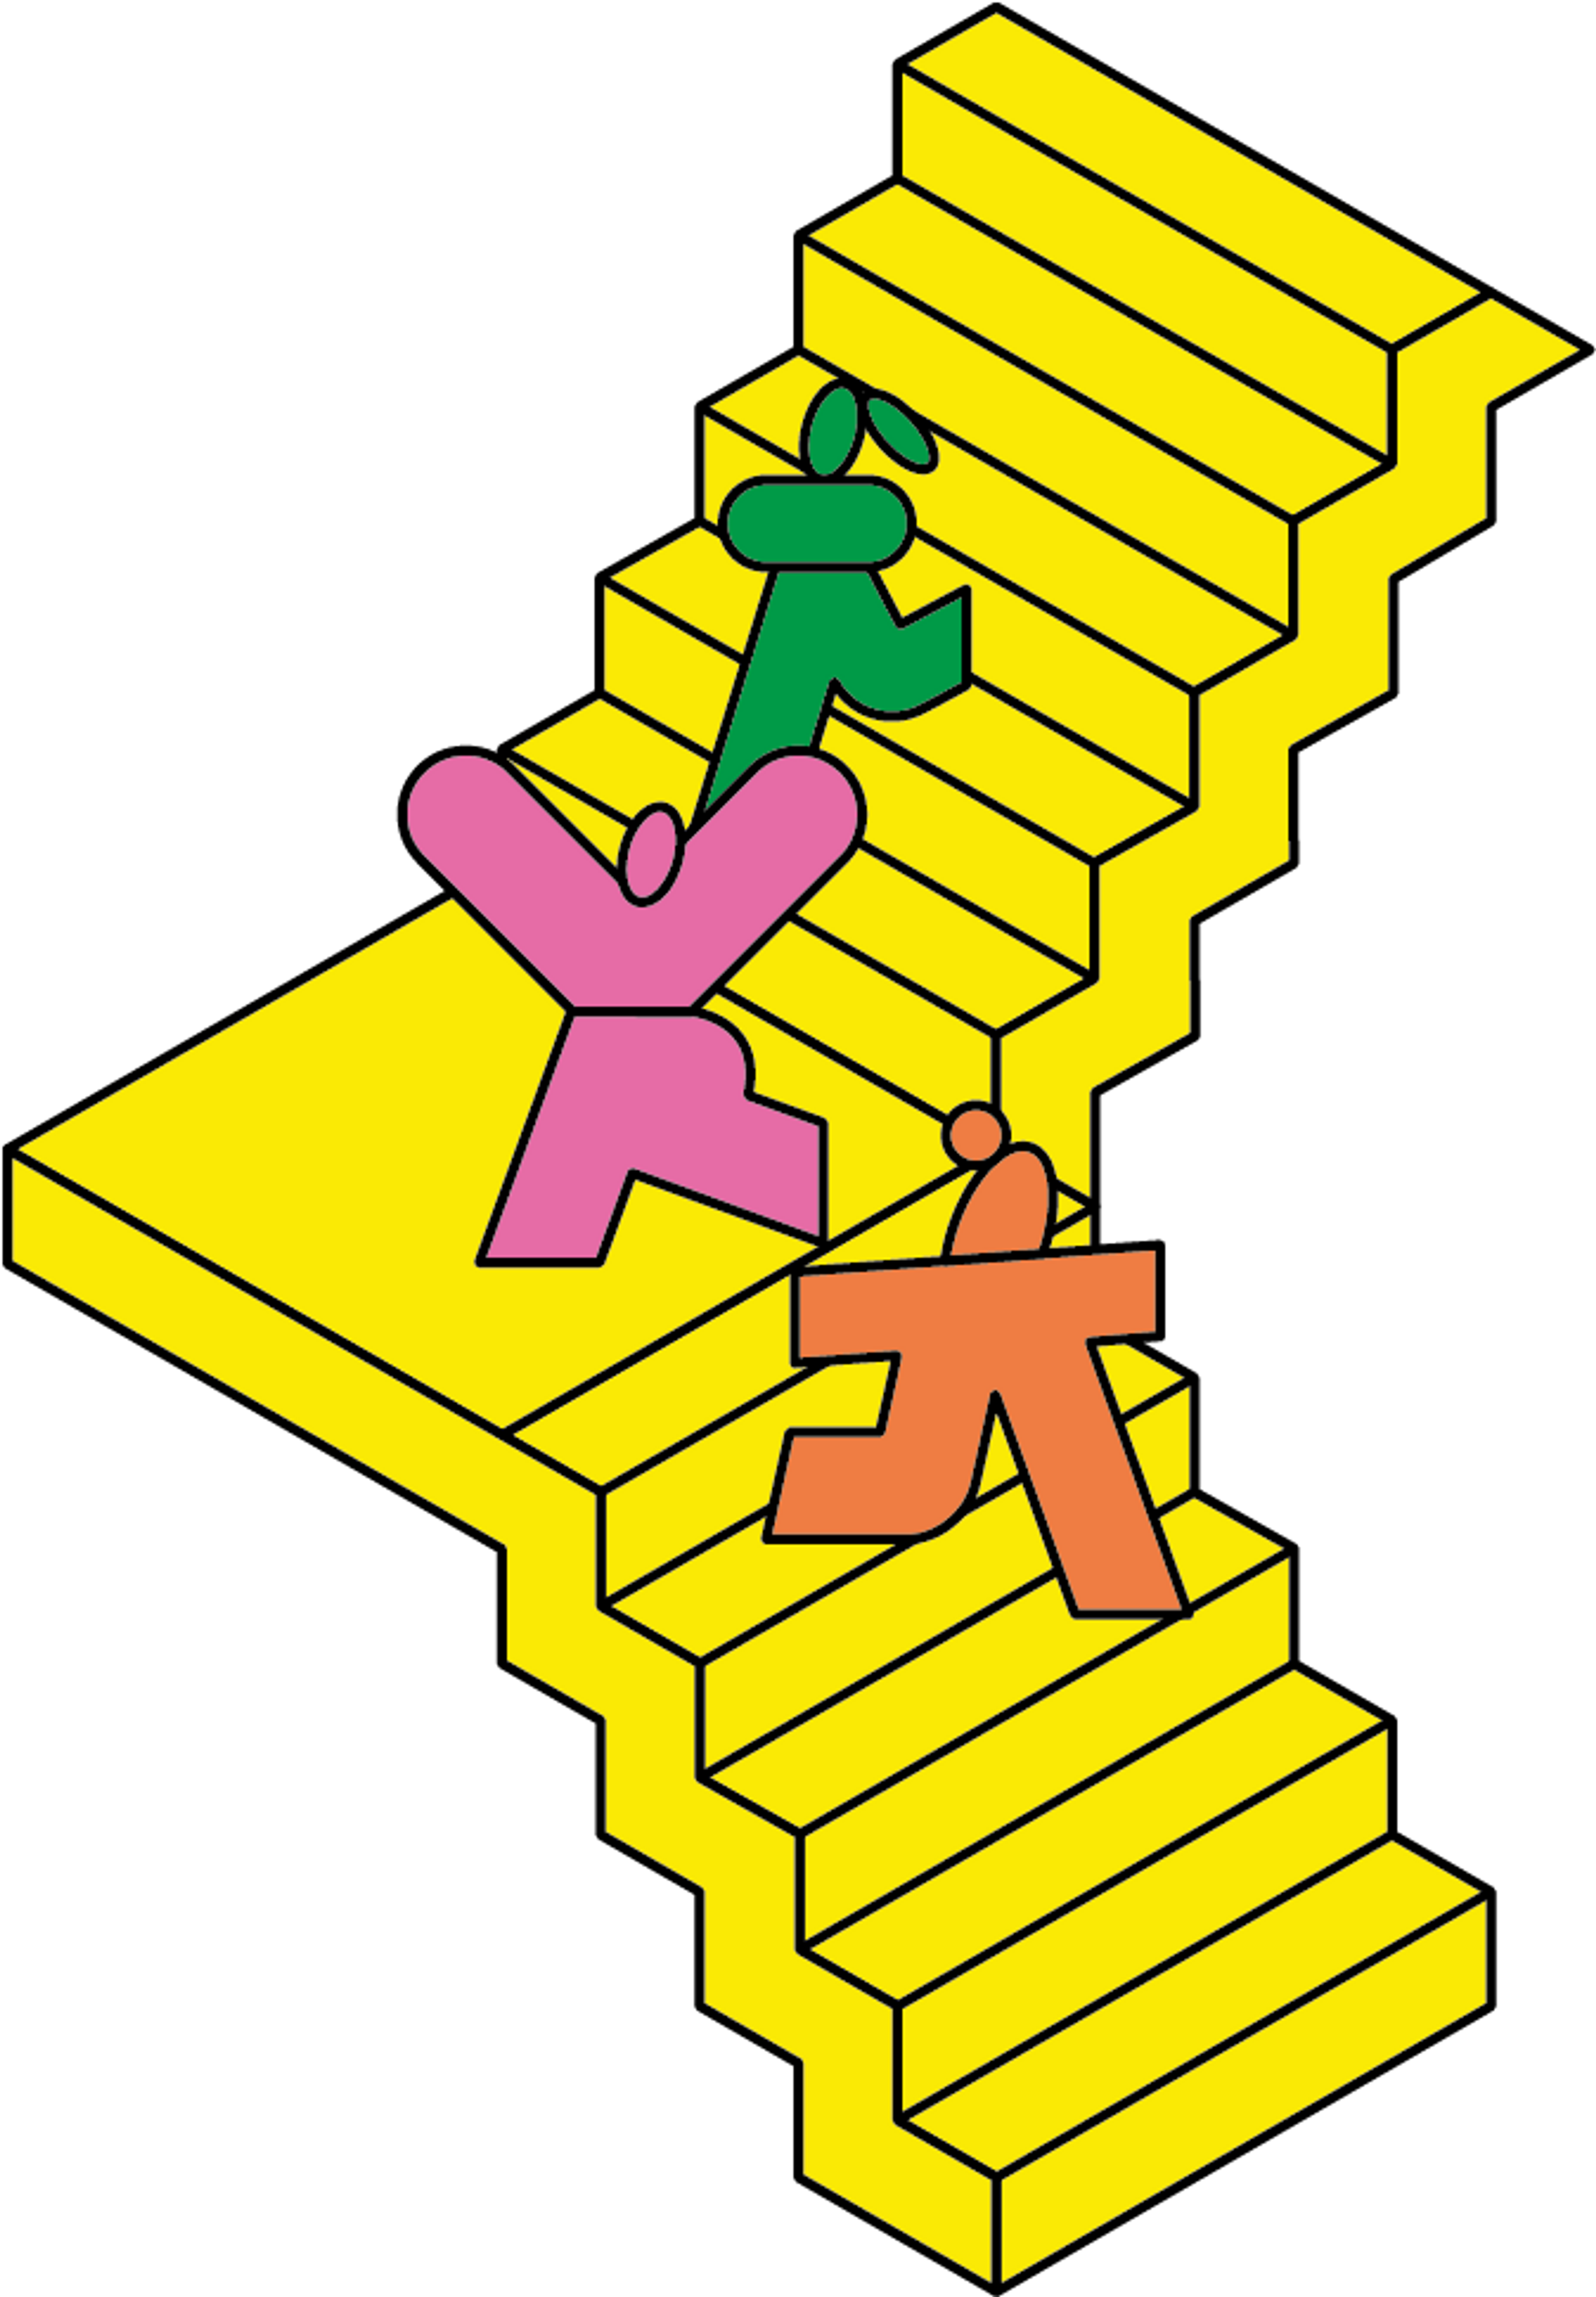 Illustration of people on stairs